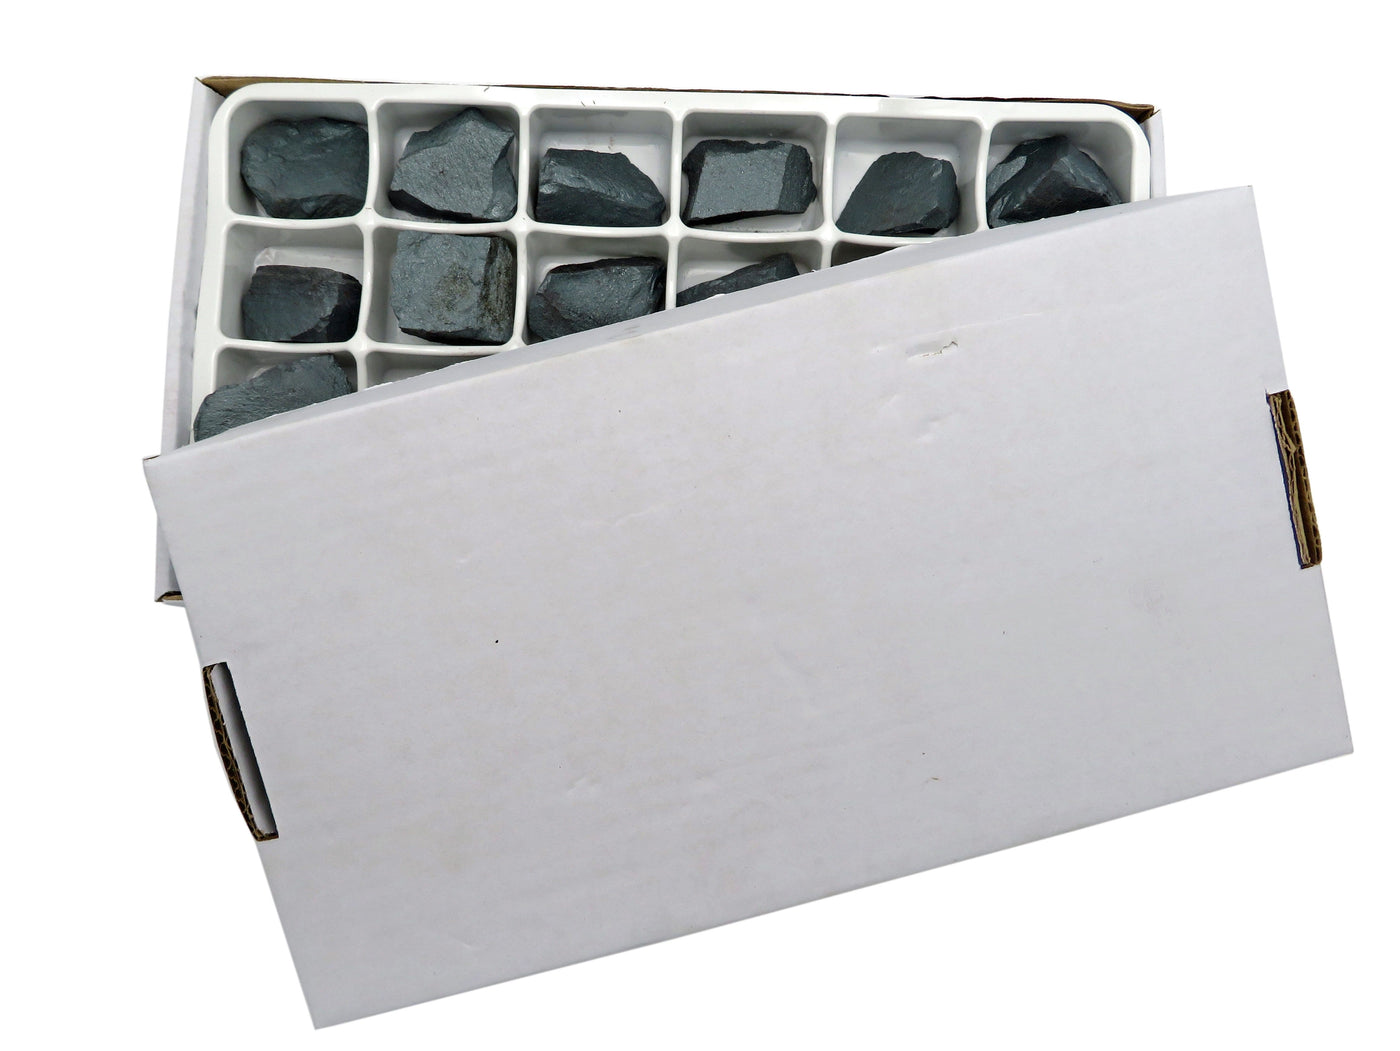 slightly covered hematite chunk box showing rock chunks and white box cover